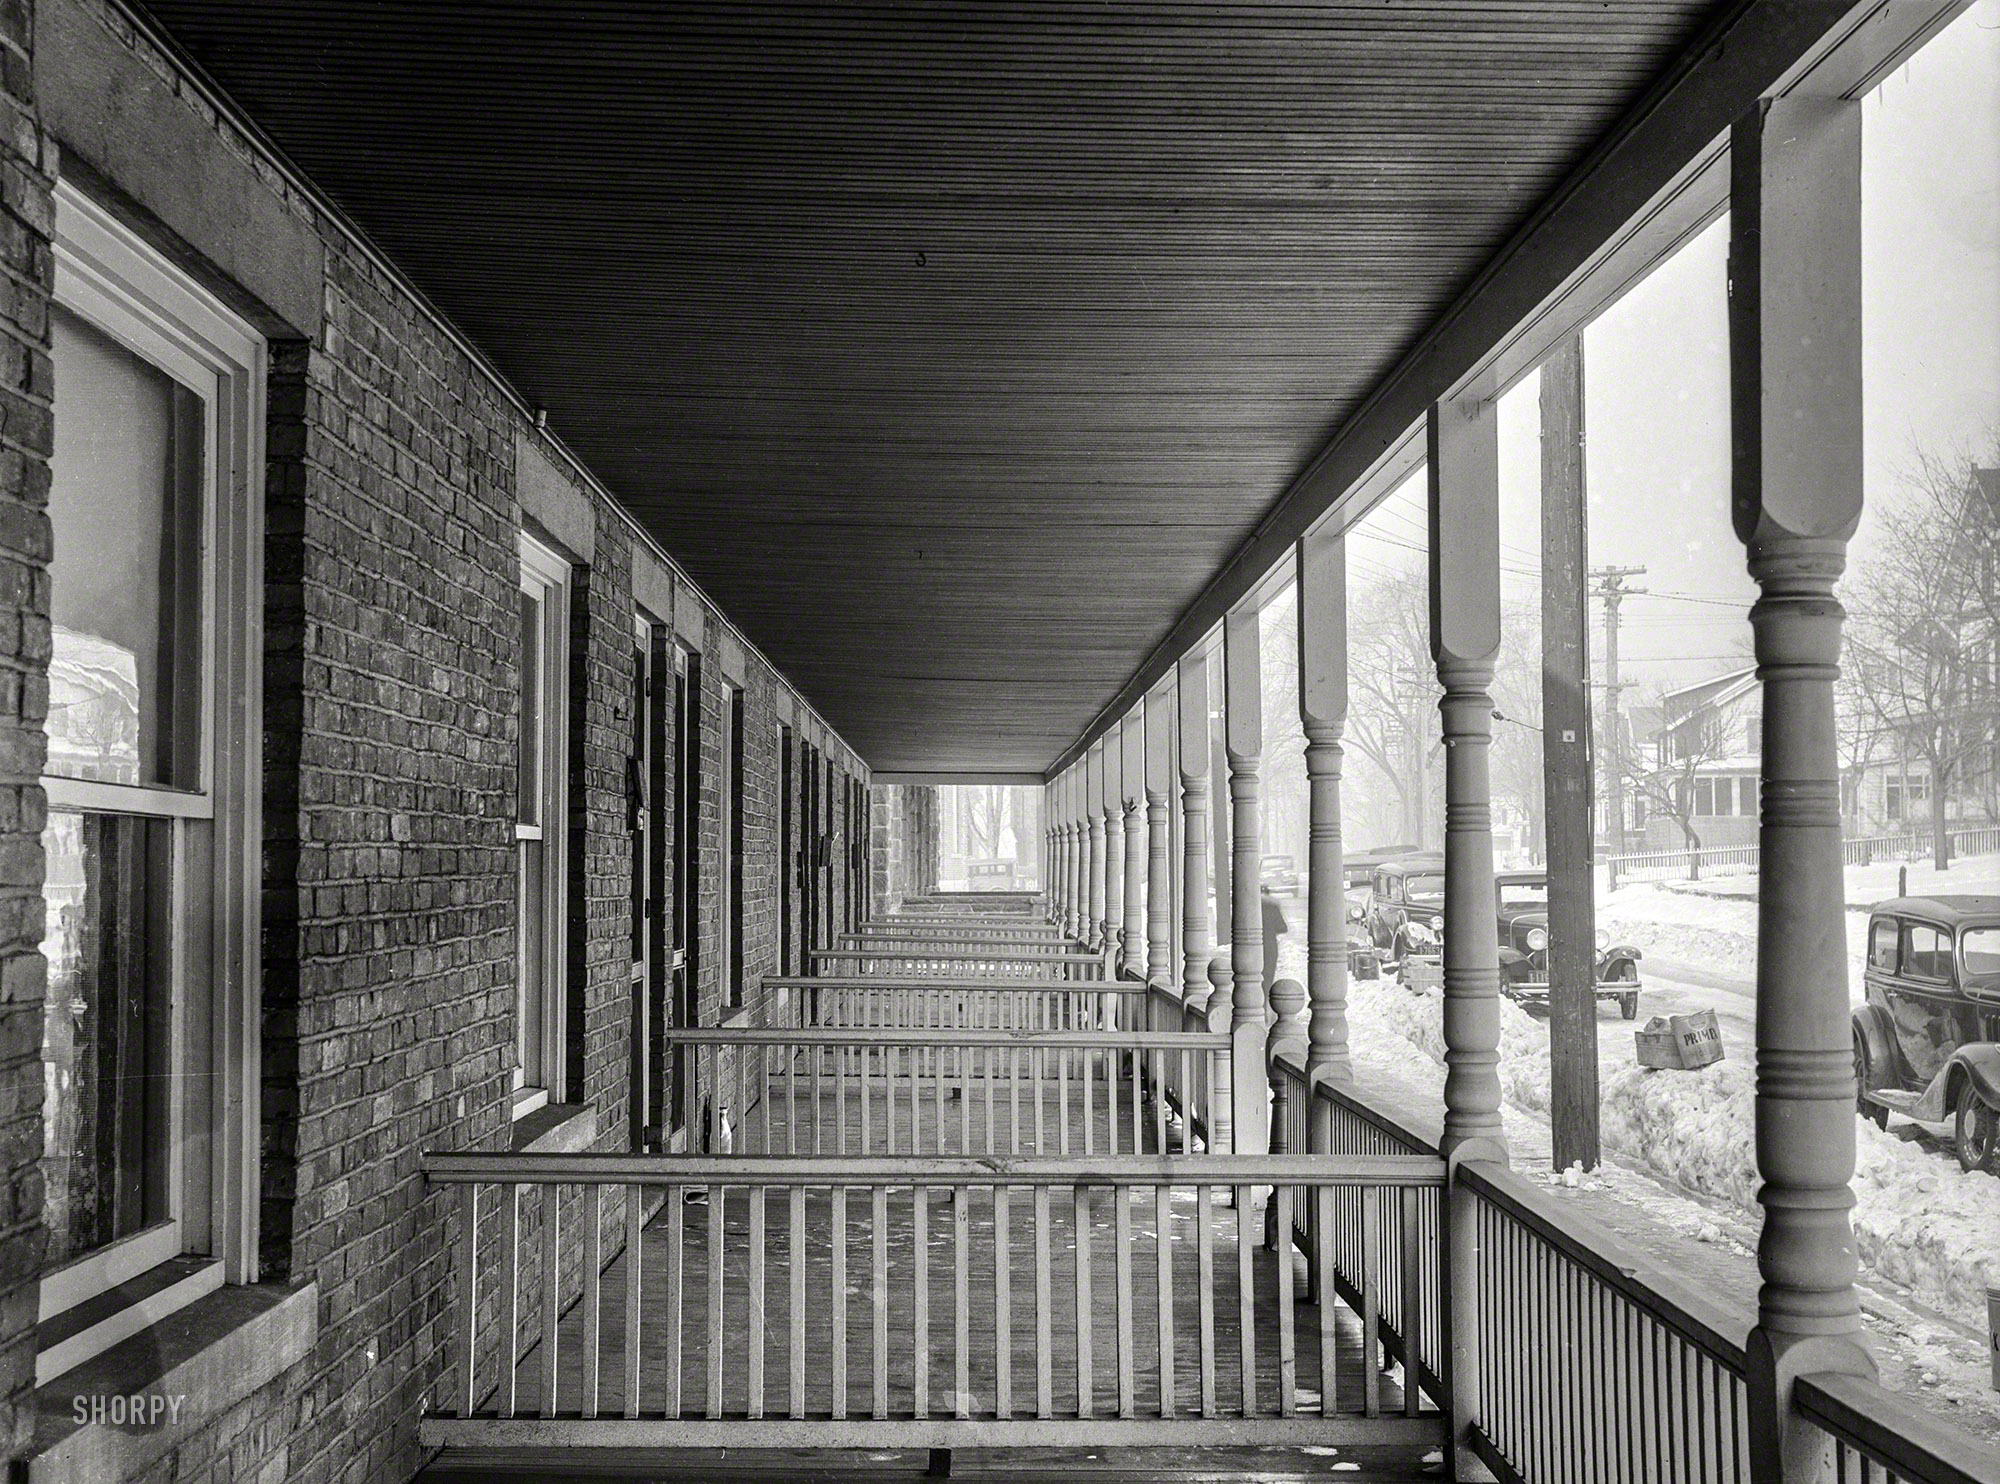 February 1936. "Back porches of identical houses in Bound Brook, New Jersey." Welcome to the M.C. Escher Rest Home. Photo by Carl Mydans. View full size.